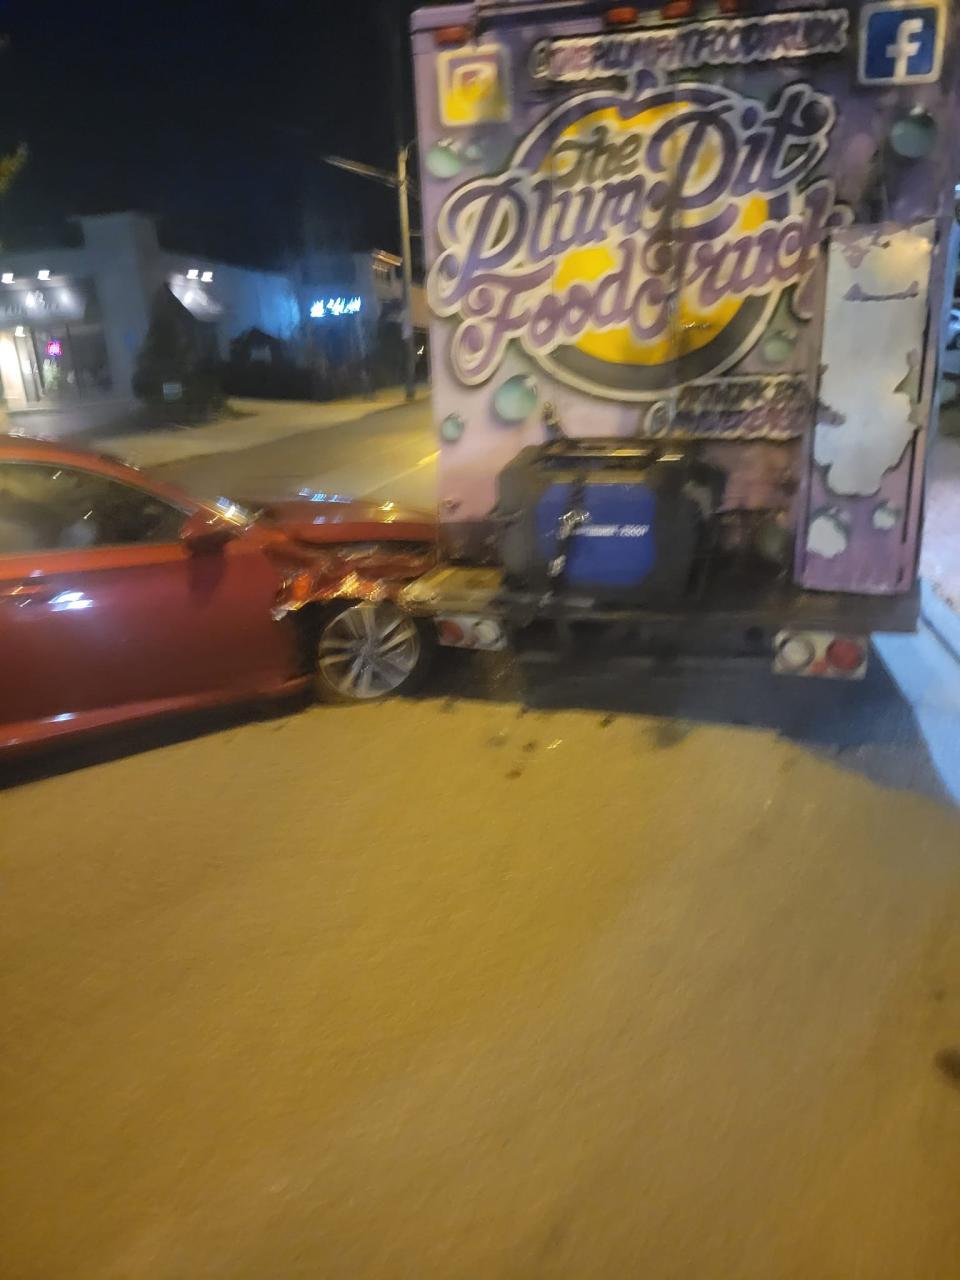 The scene after a car struck the Plum Pit Food Truck on N. Dupont Road in front of Acme Market in Wilmington's Trolley Square area last month.